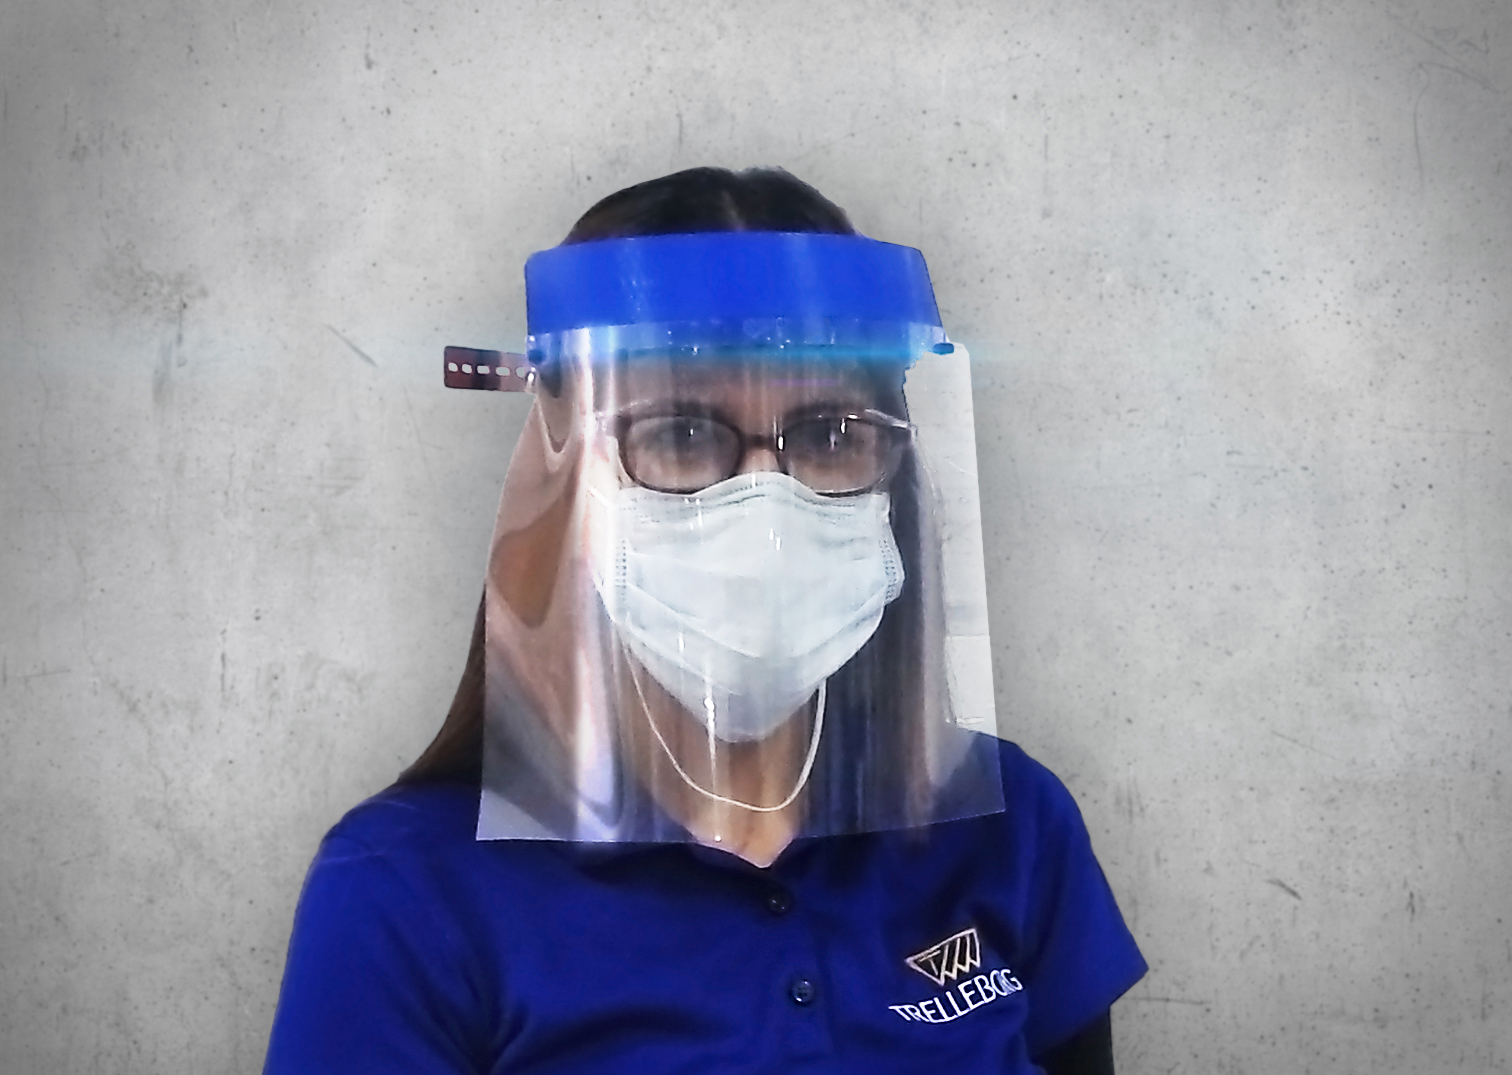 Trelleborg supplies Boeing with 3D-printed PPE component